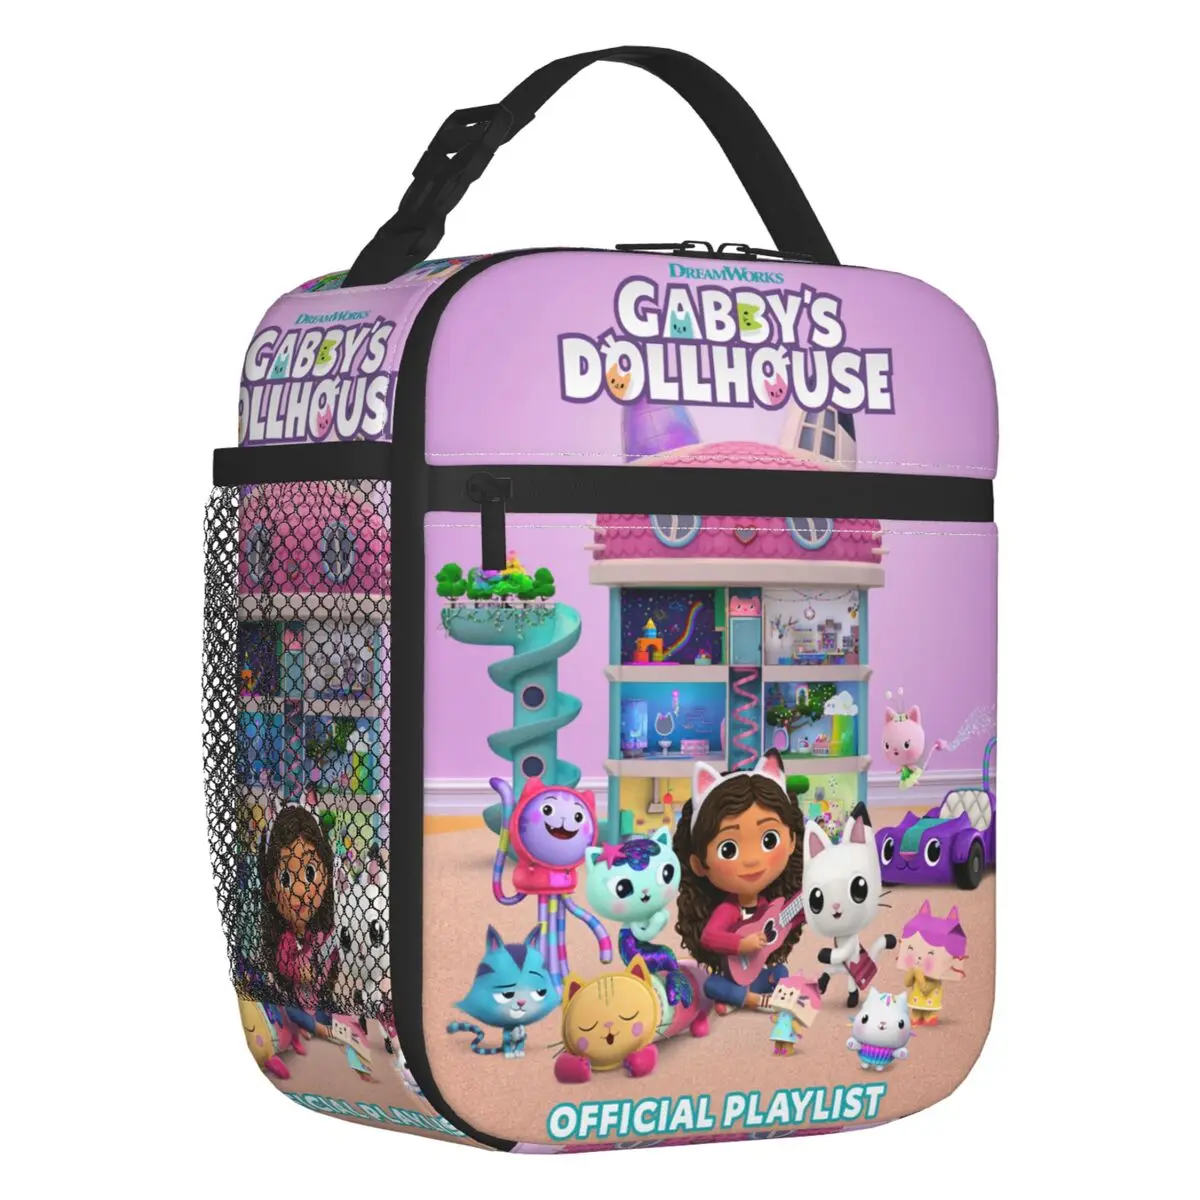 Gabbys Dollhouse Insulated Lunch Bags for School Office Pandy Paws Gabby Mermaid Cat Leakproof Thermal Cooler Bento Box Women